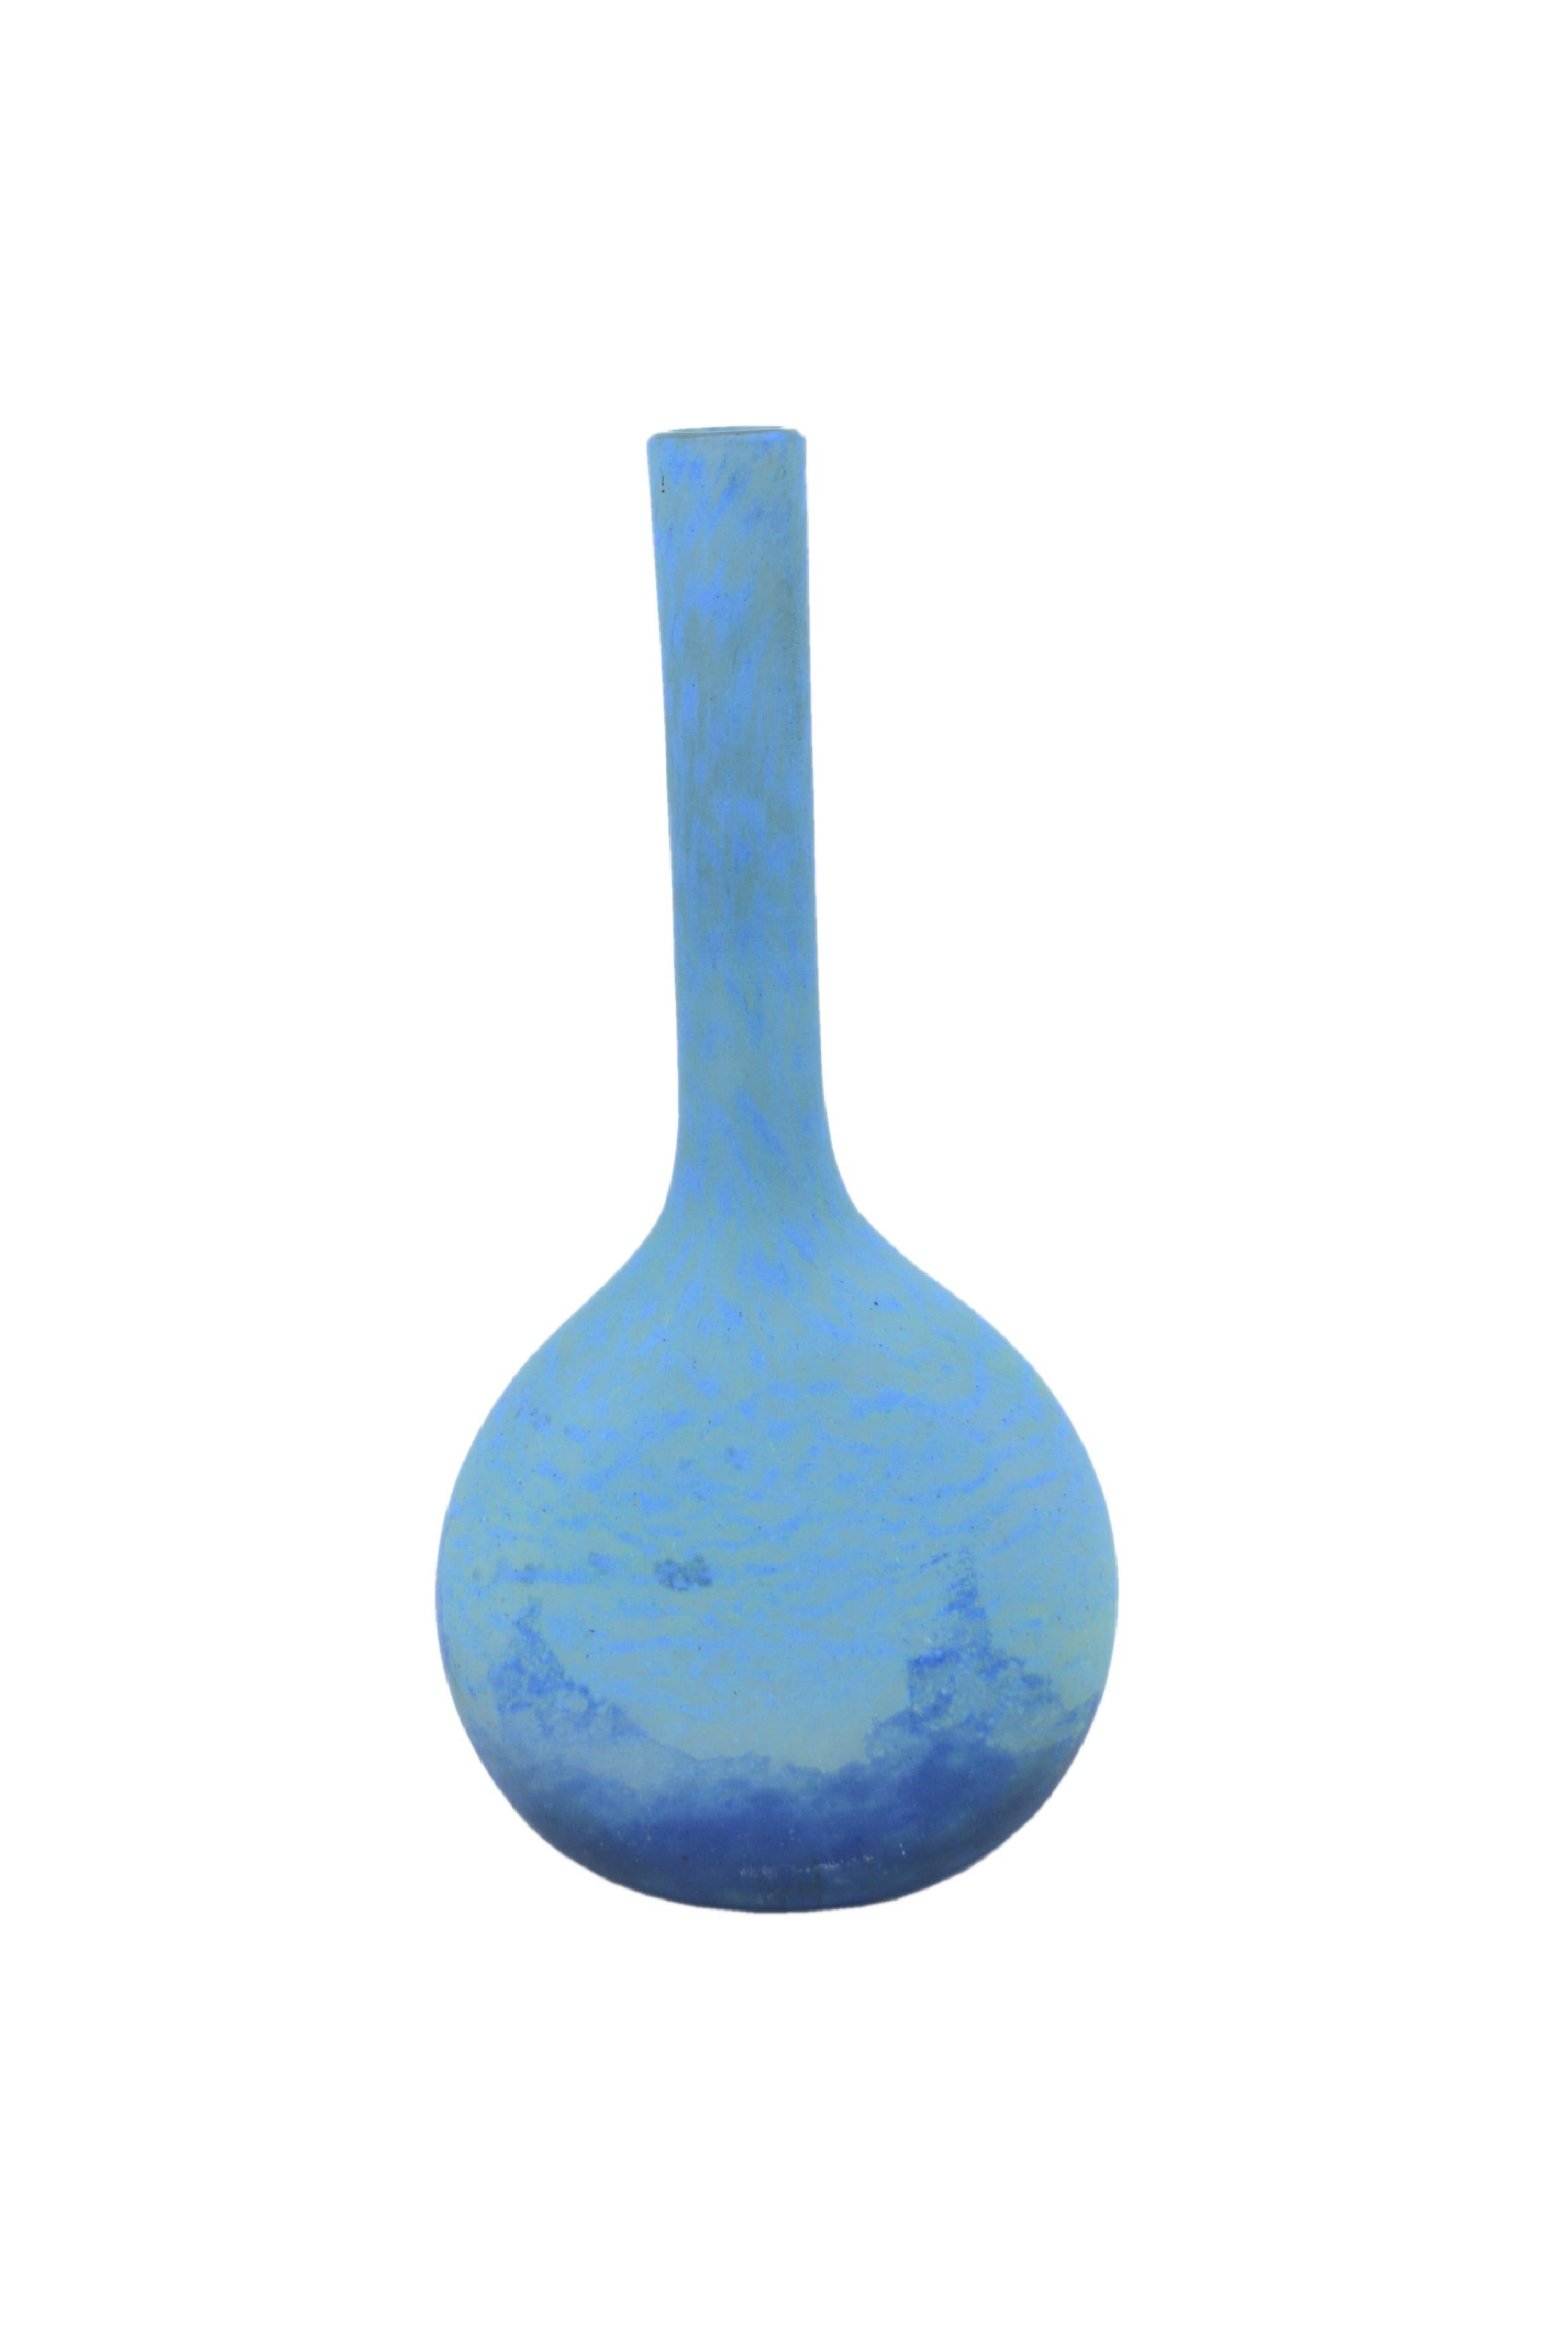 French Daum Nancy, Large Blue Vase with Long Neck For Sale